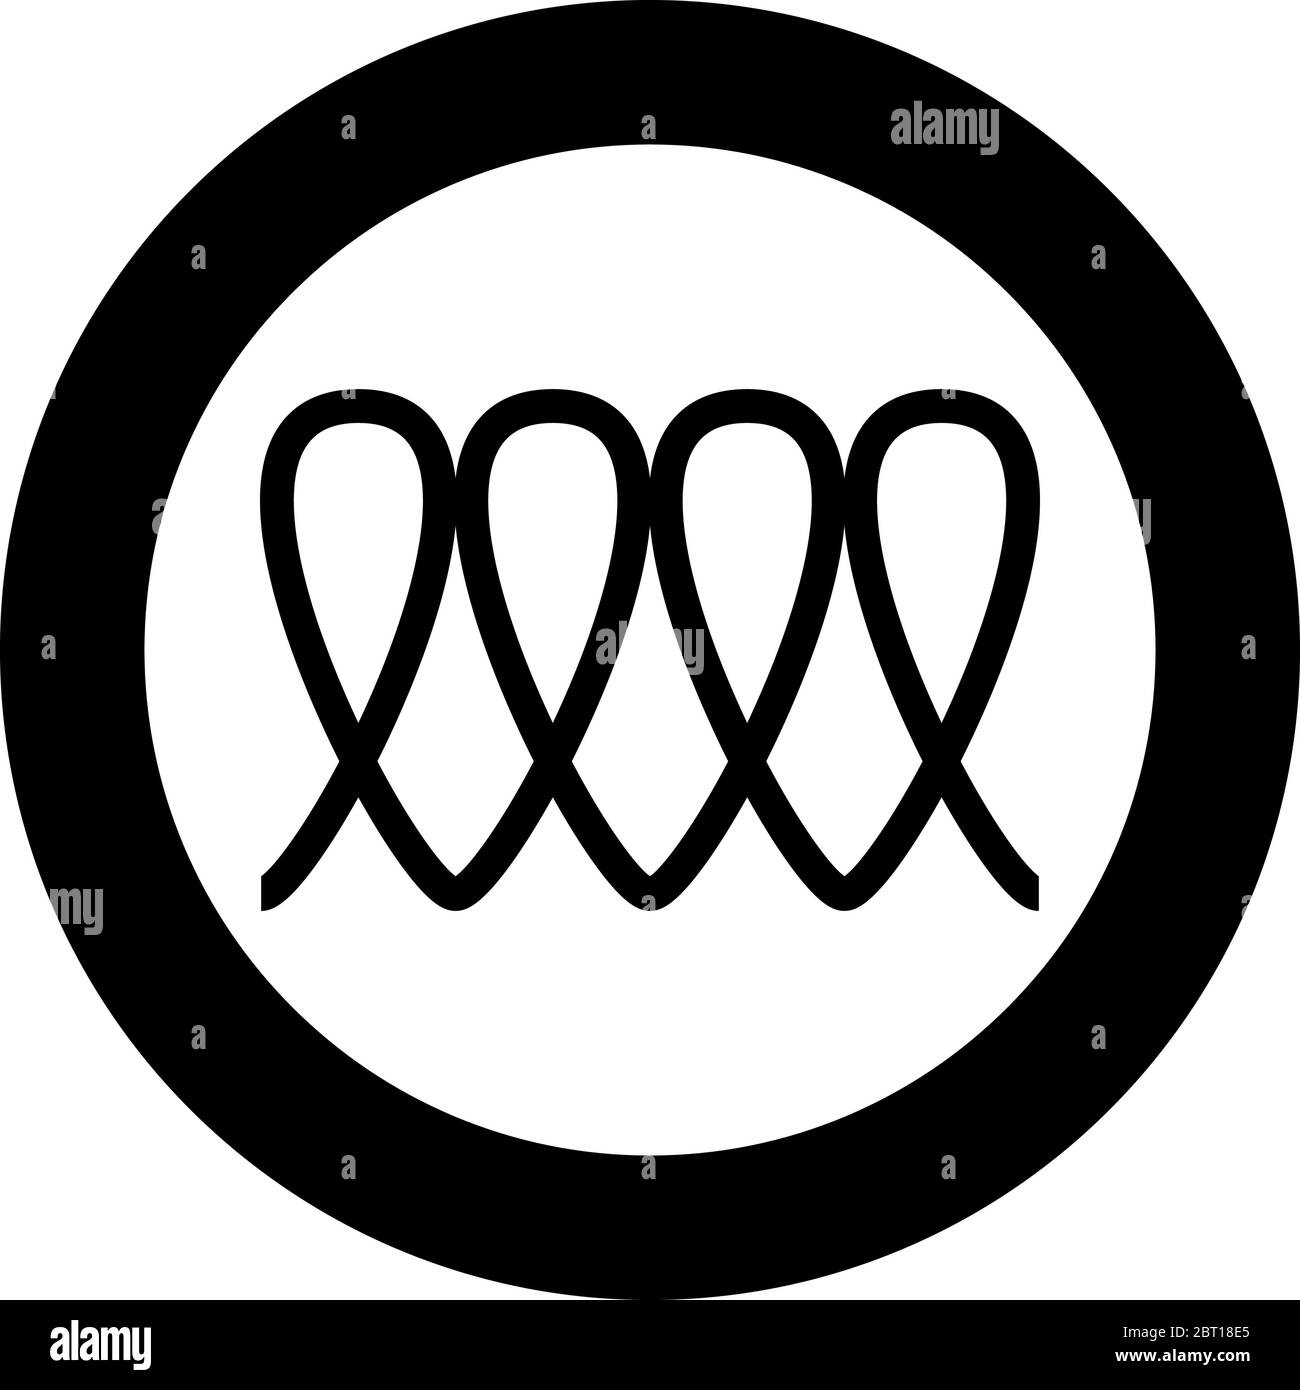 Induction cooking spiral electrical heat symbol type cooking surfaces sign utensil destination panel icon in circle round black color vector Stock Vector